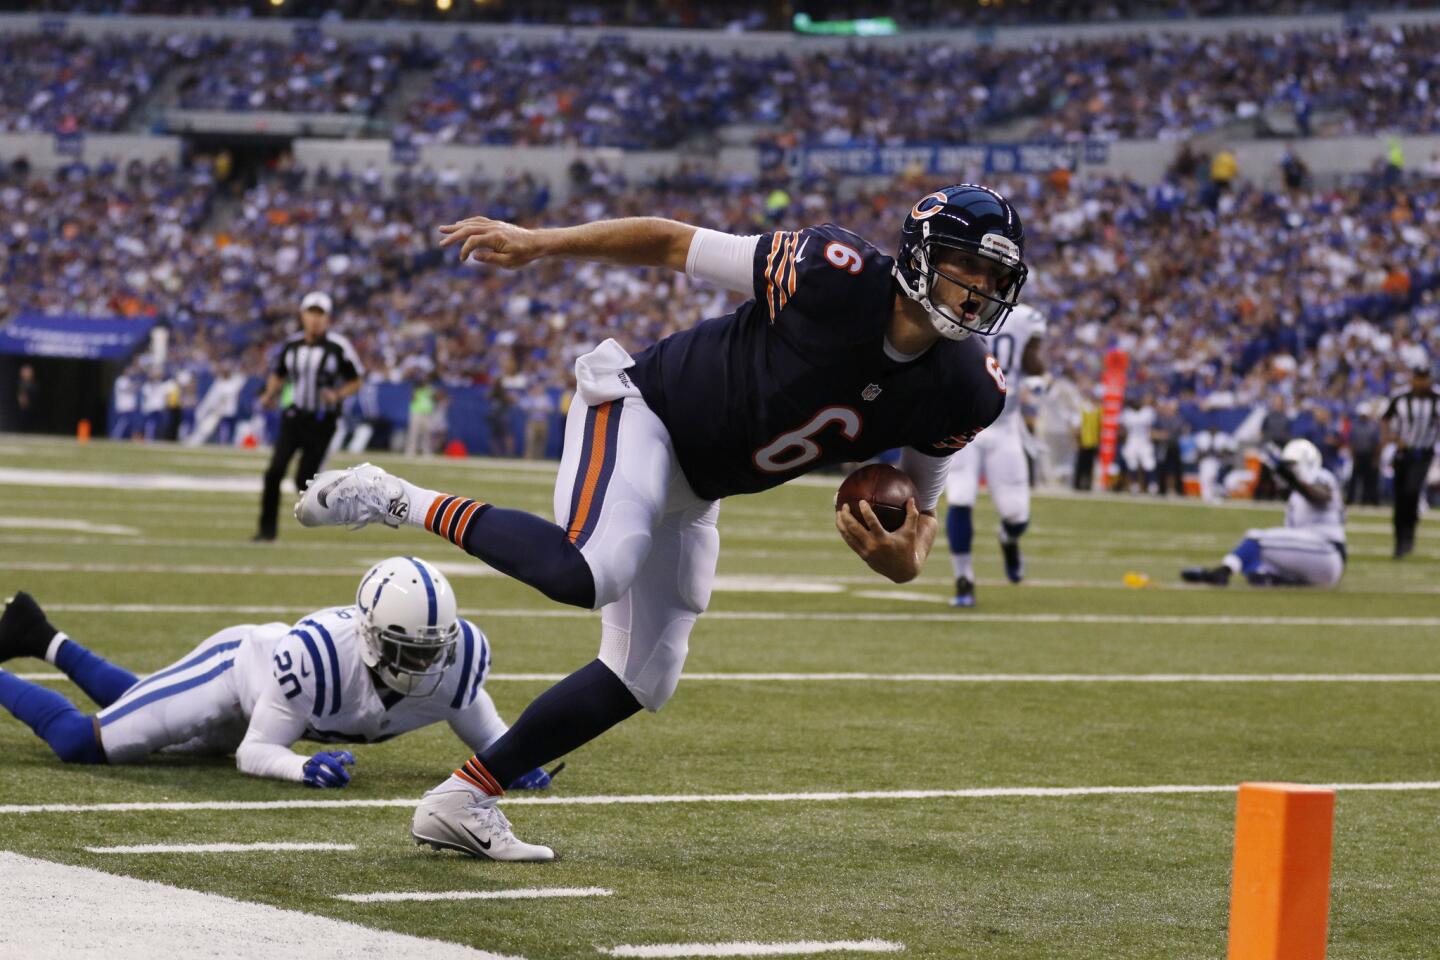 Bears quarterback Jay Cutler is tripped up by Colts cornerback Darius Butler in the first half.